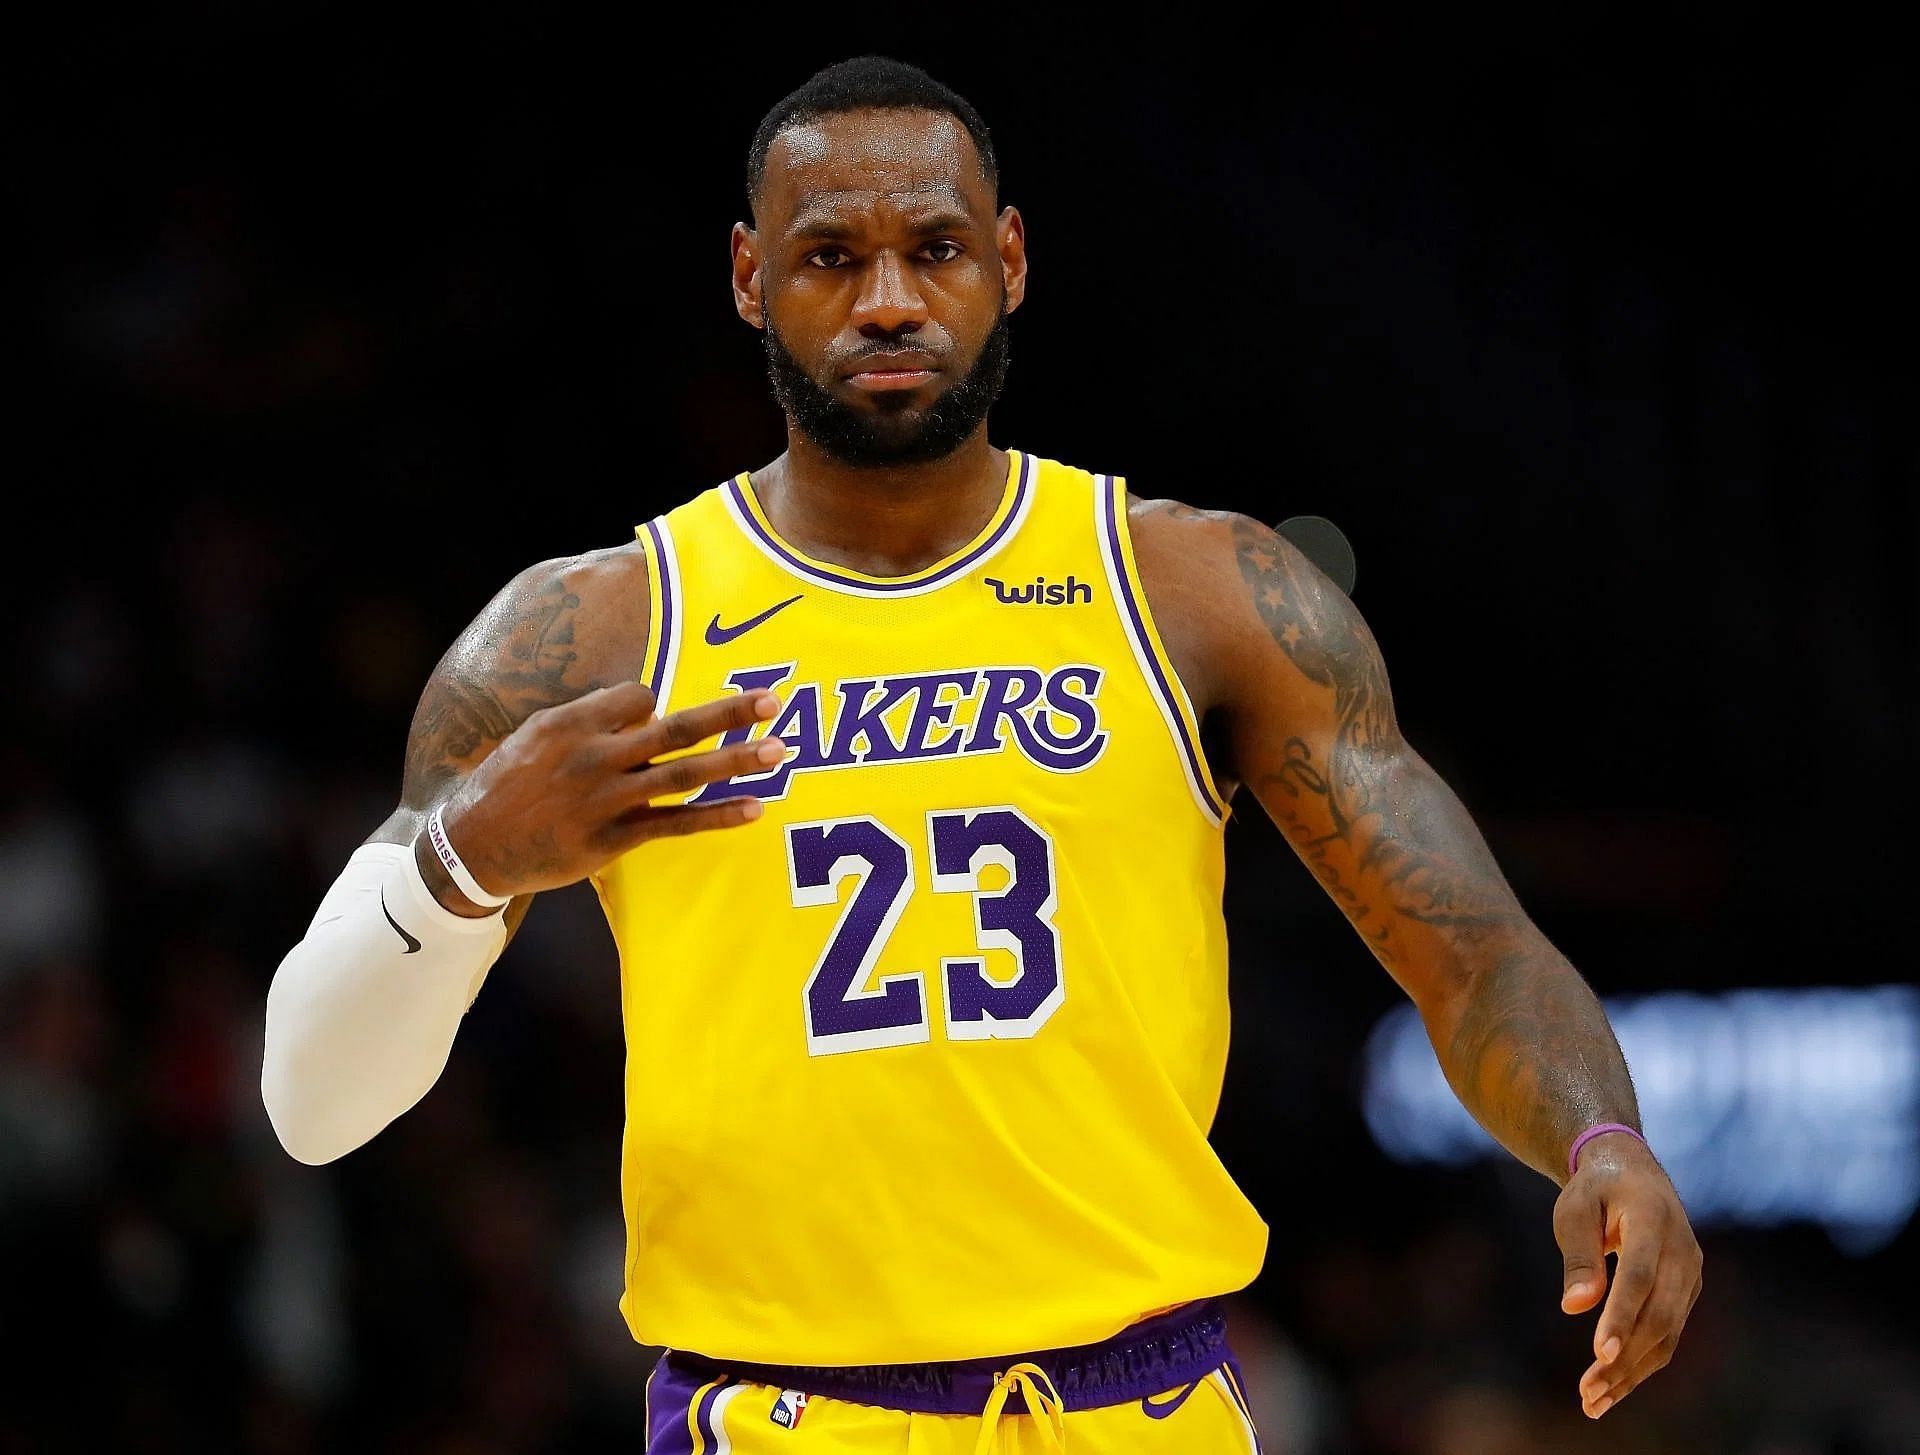 NBA superstar LeBron James of the Los Angeles Lakers has qualified for exemption from the league